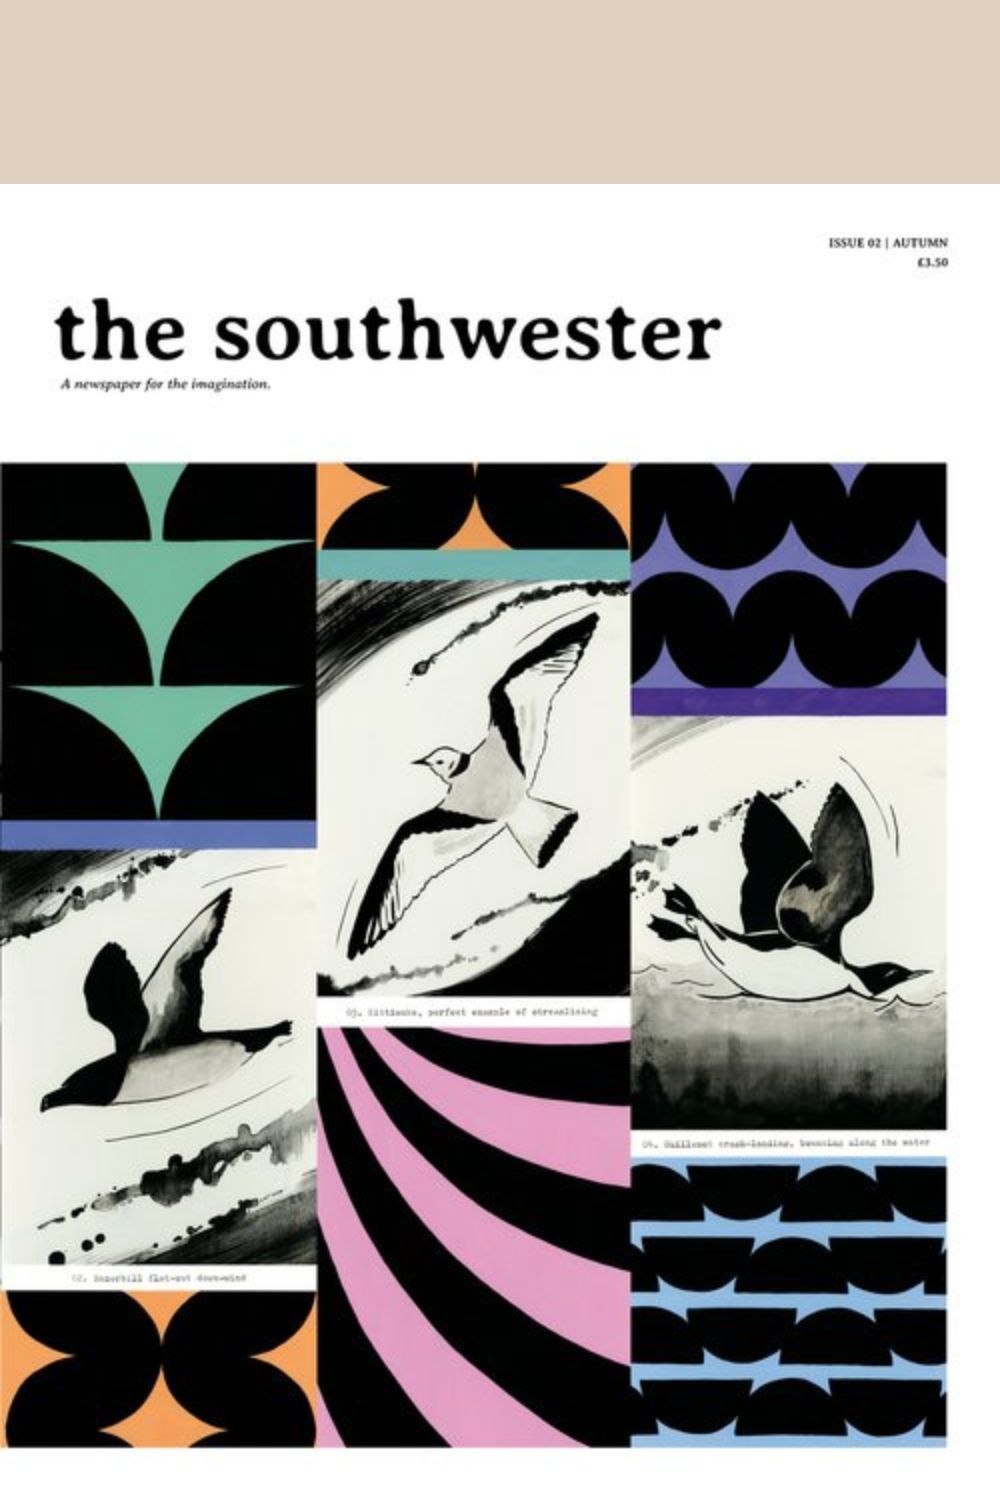 the southwester newspaper issue 2 cover